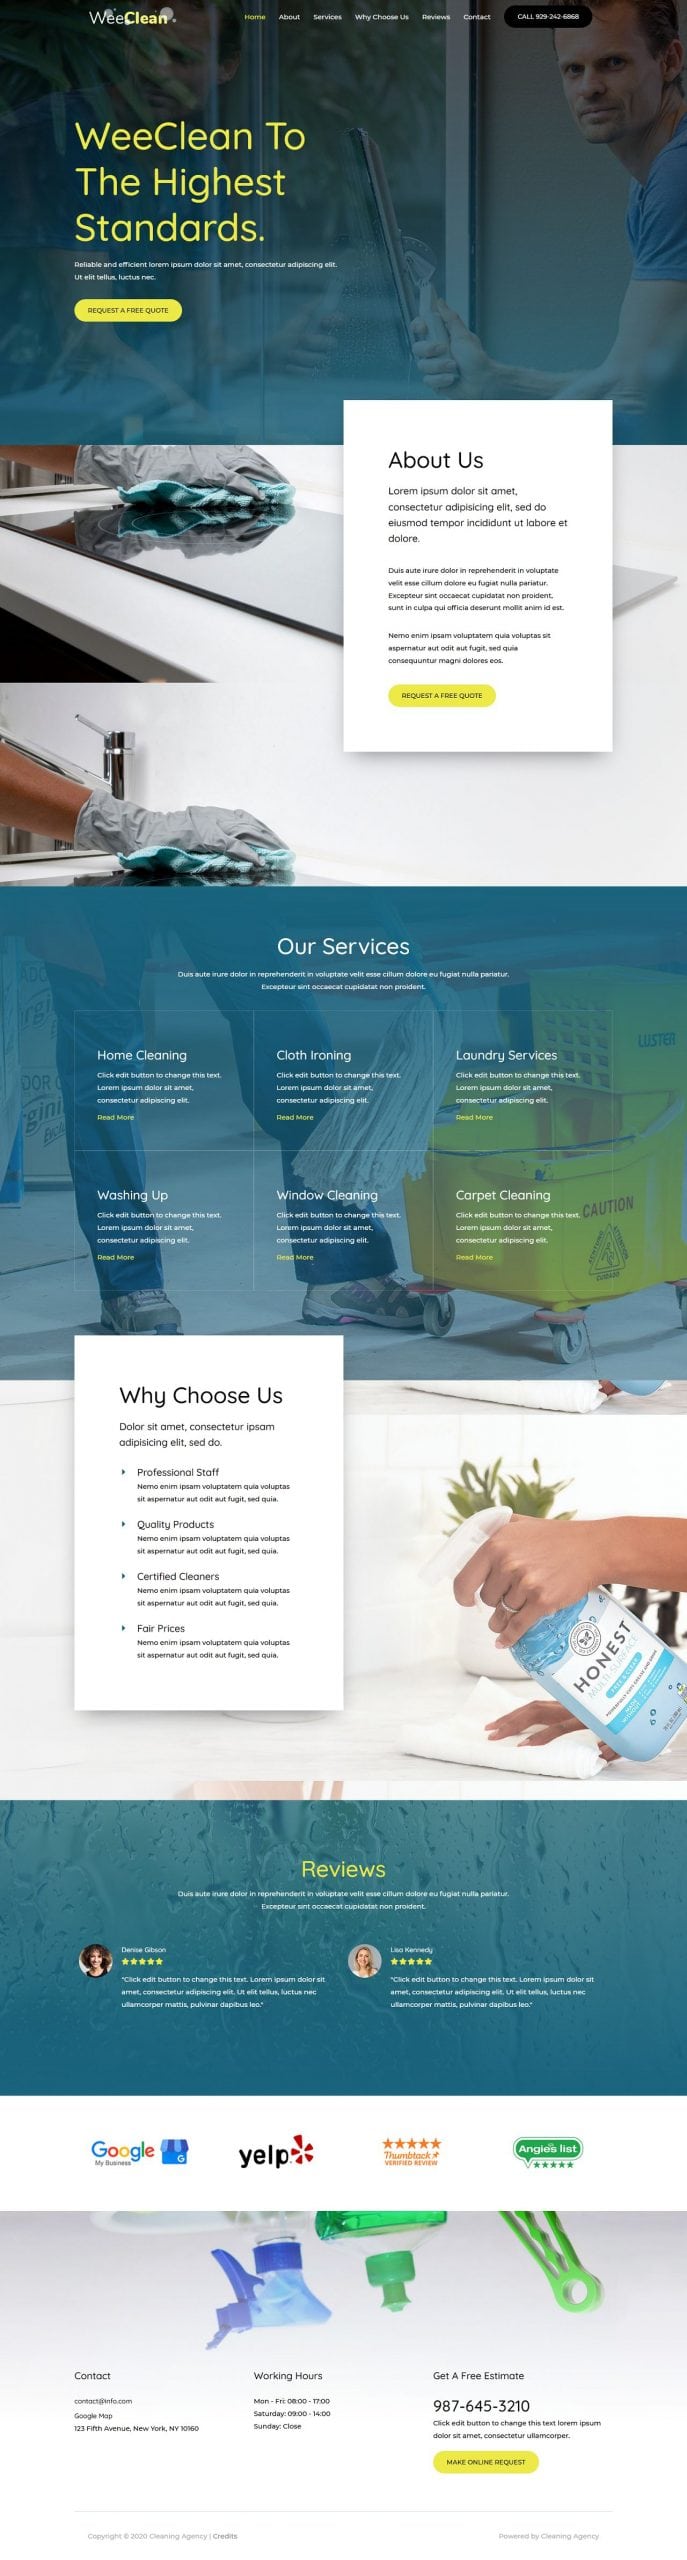 Fagowi.com Website Design Templates For Cleaning Services Agency - Home Page Image